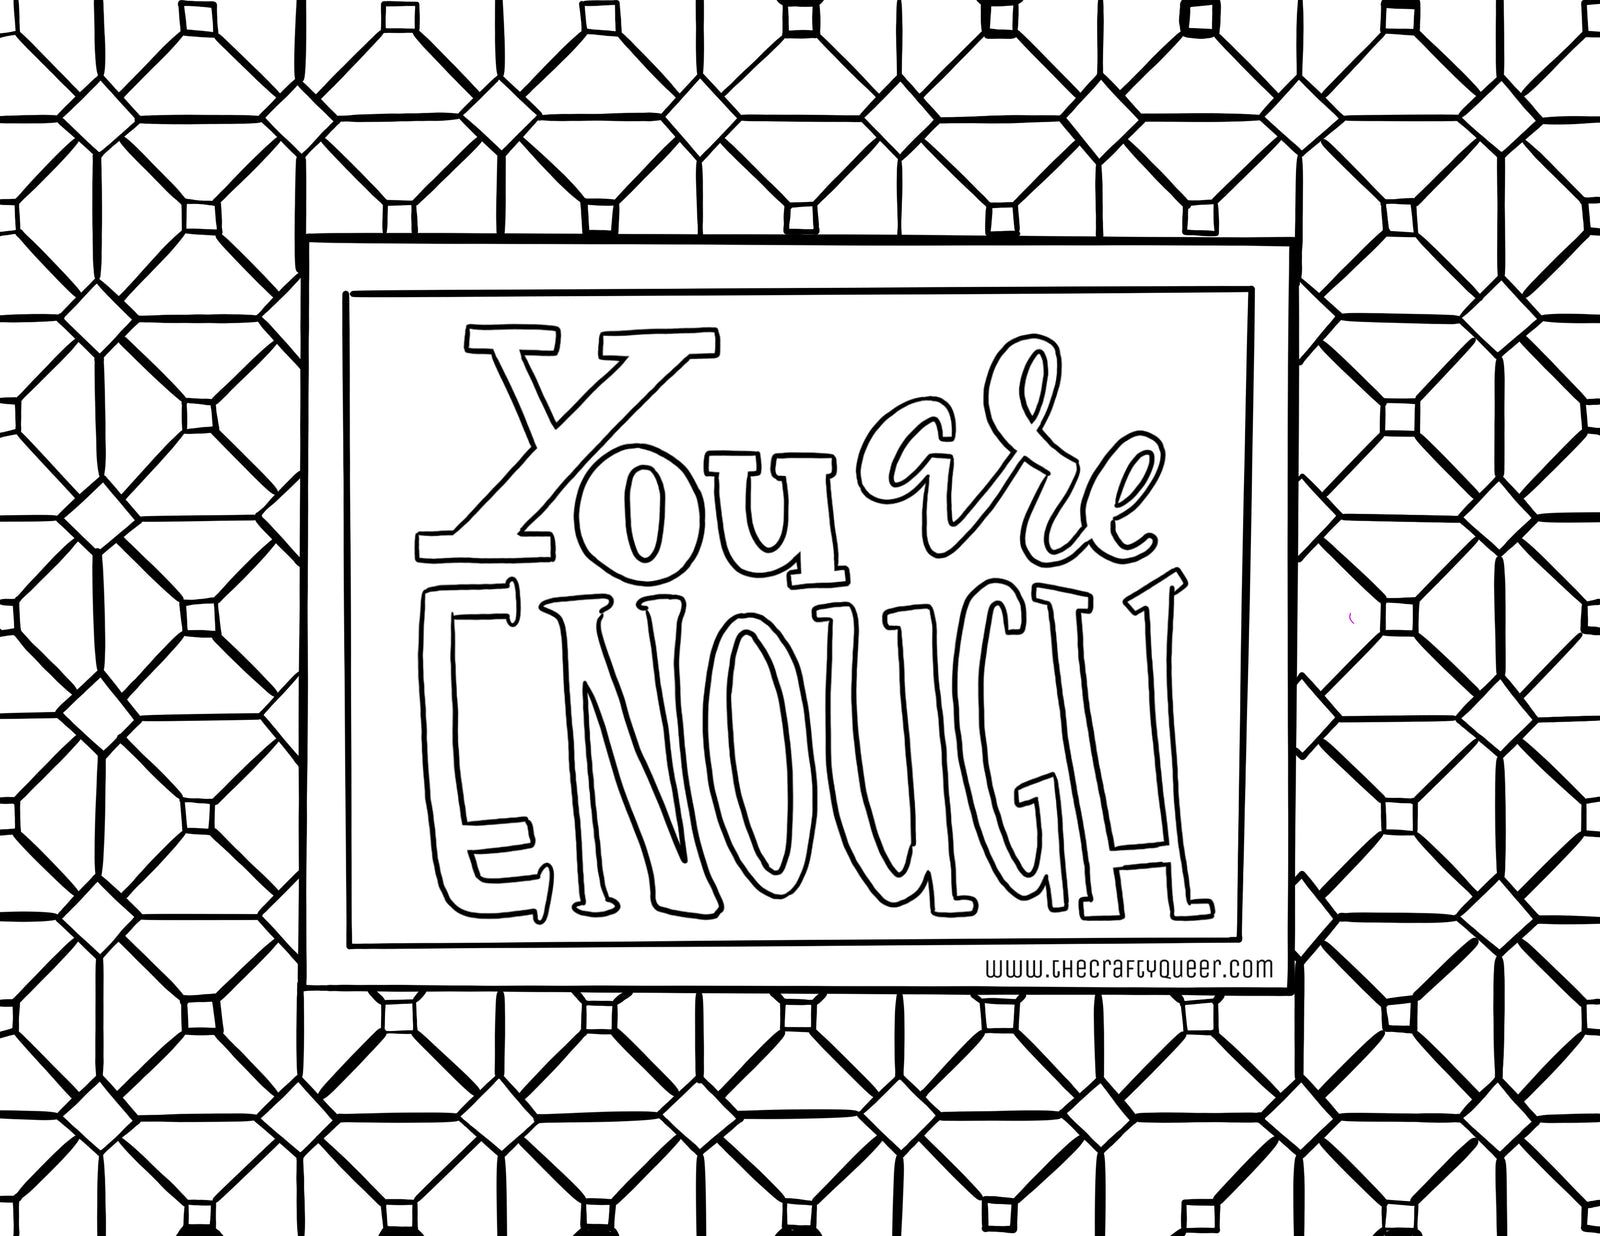 Free Coloring Pages – The Crafty Queer